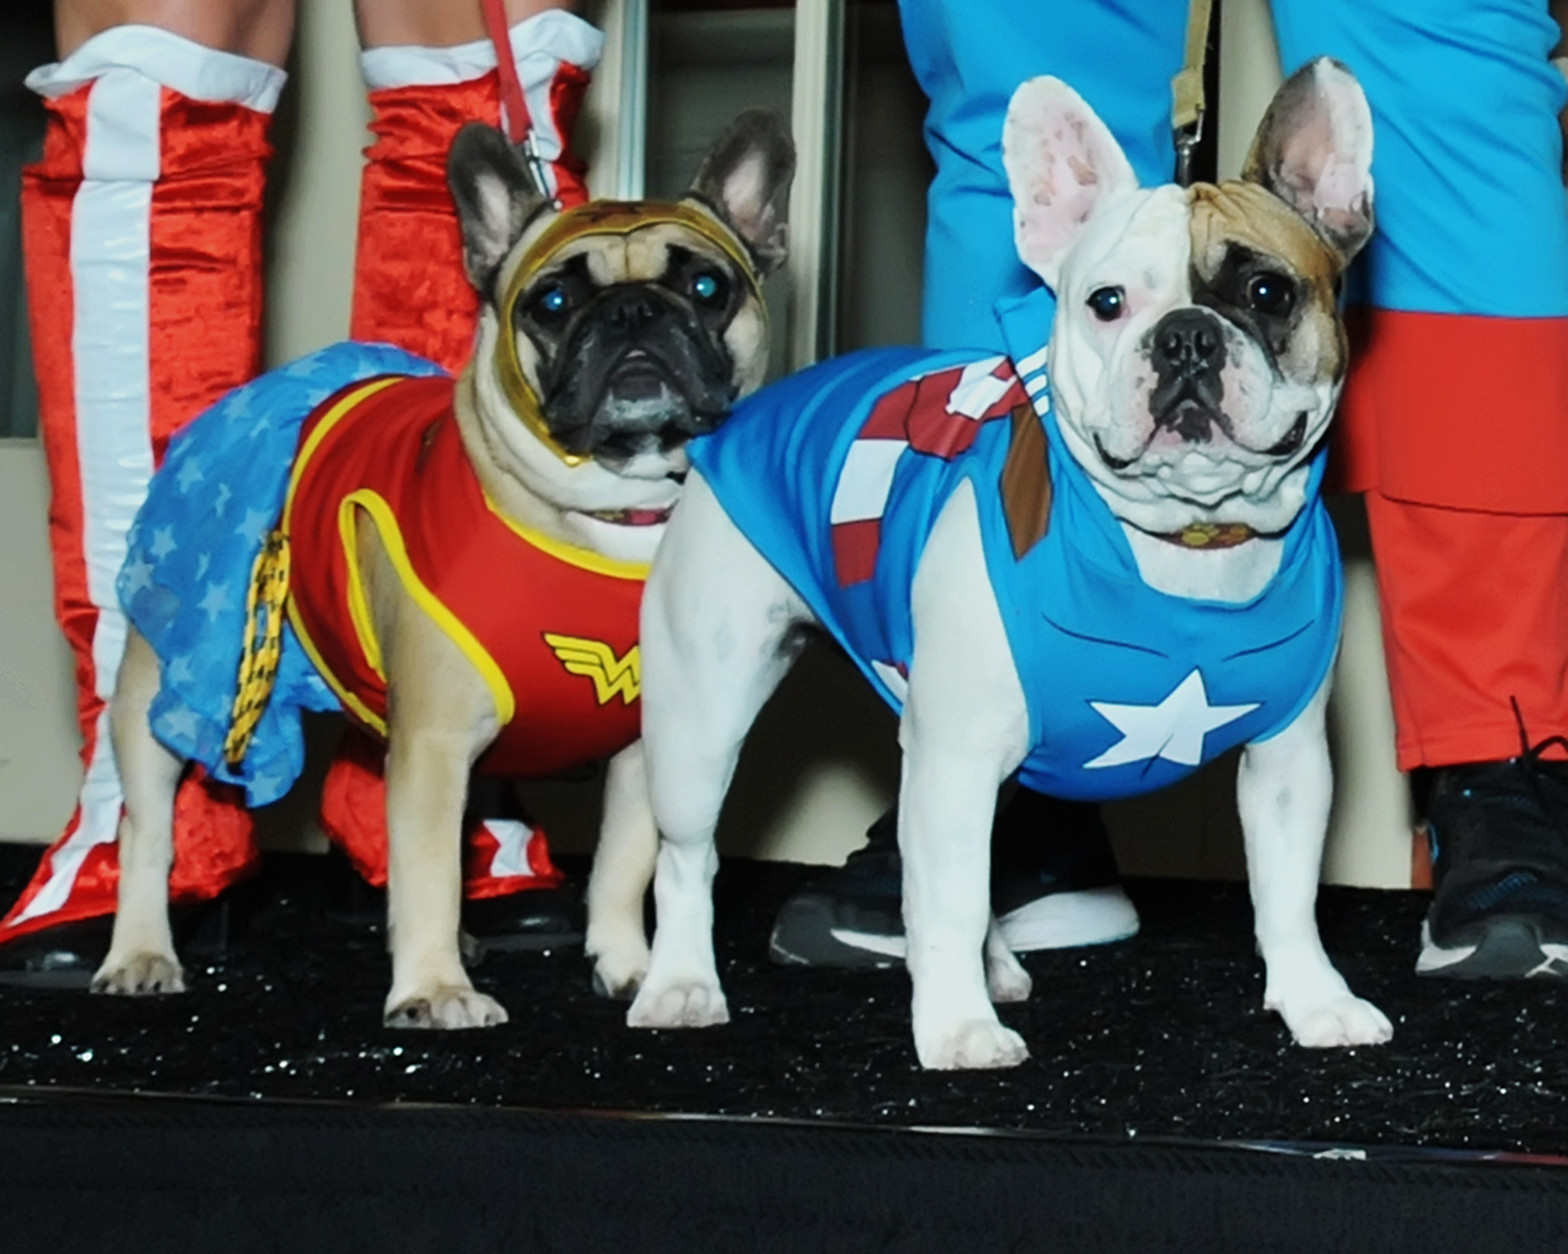 Original Super Friends Wonder Woman and Captain America. (Shannon Finney Photography)